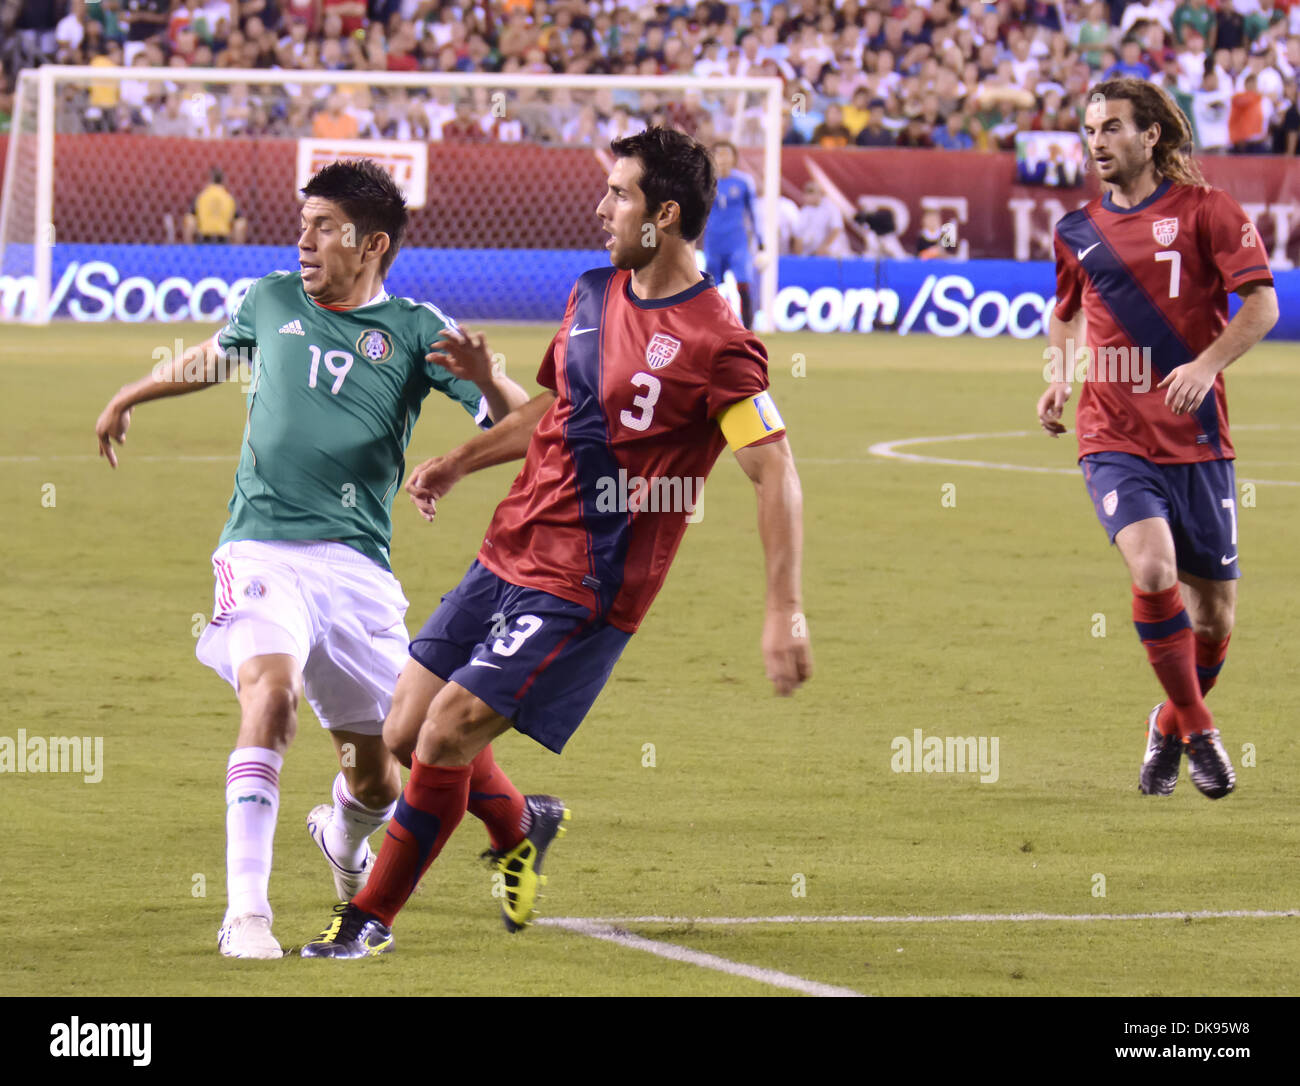 Aug. 10, 2011 - Philadelphia, PA, USA - US National Team player, CARLOS BOCANEGRA, fights for the ball against Mexico player, ORIBE PERALTA, during a friendly match with Mexico held at Lincoln Financial Field in Philadelphia Pa. (Credit Image: © Ricky Fitchett/ZUMAPRESS.com) Stock Photo